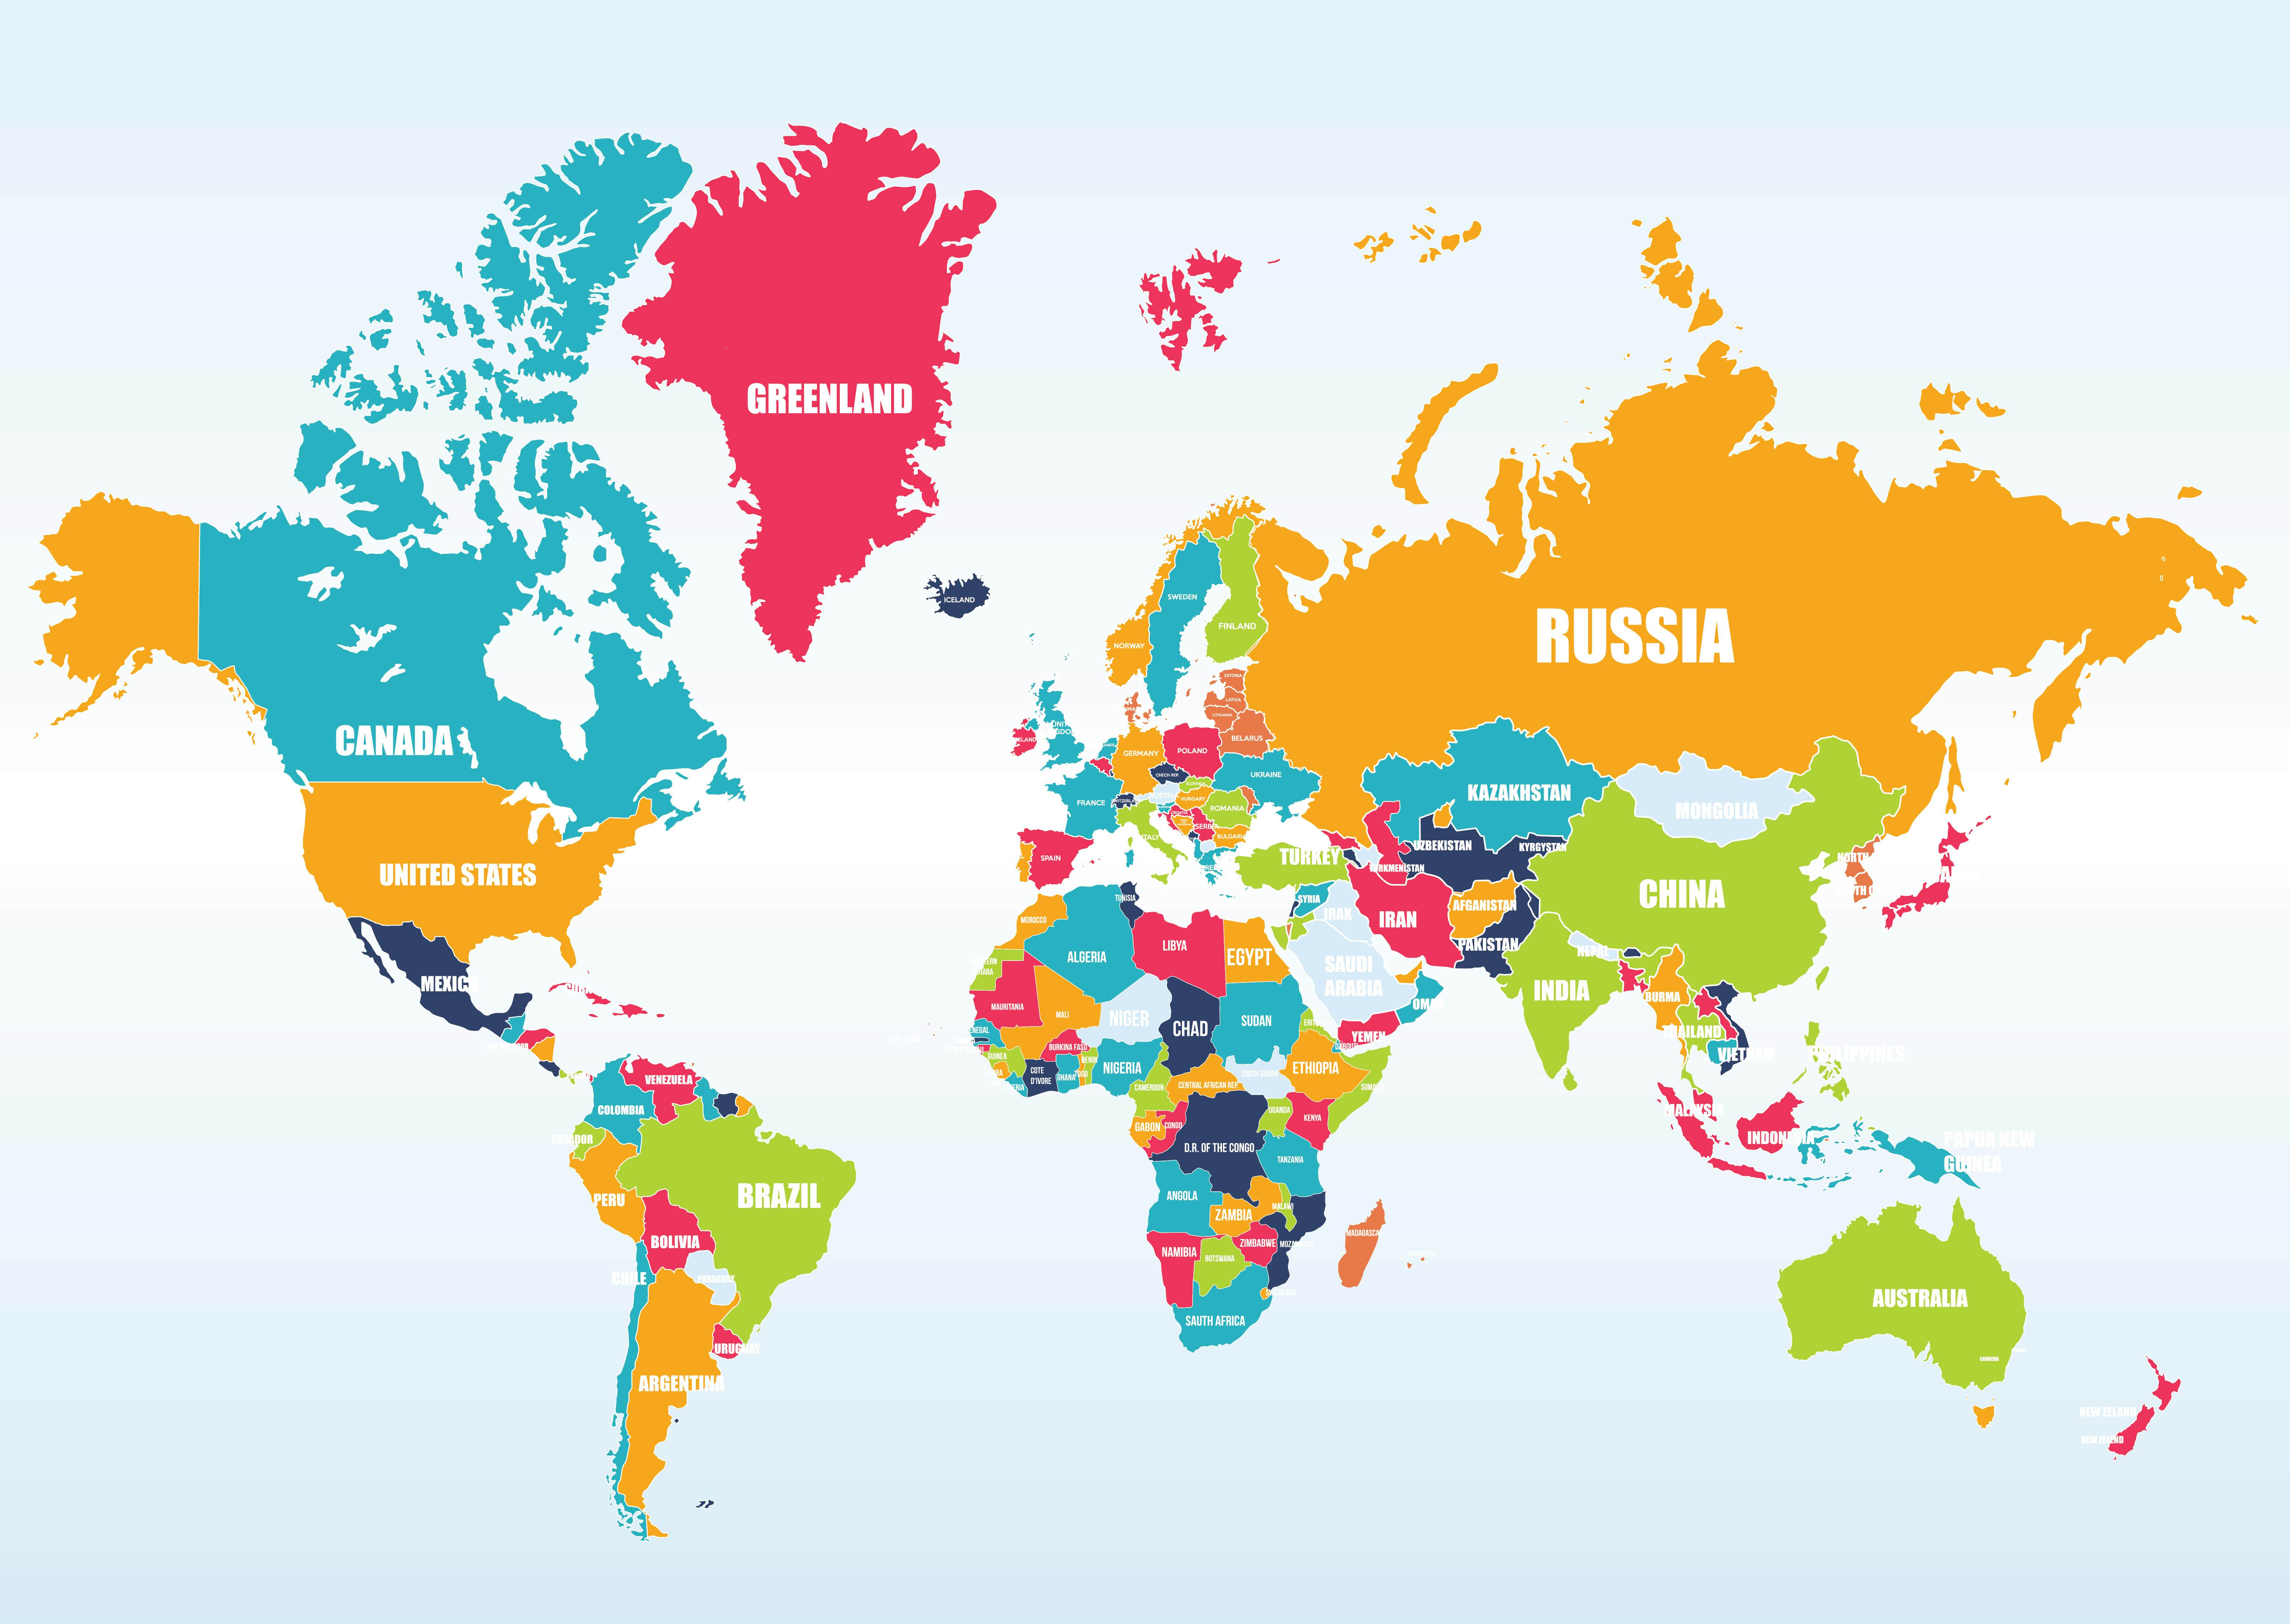 Map of the world, all study destinations